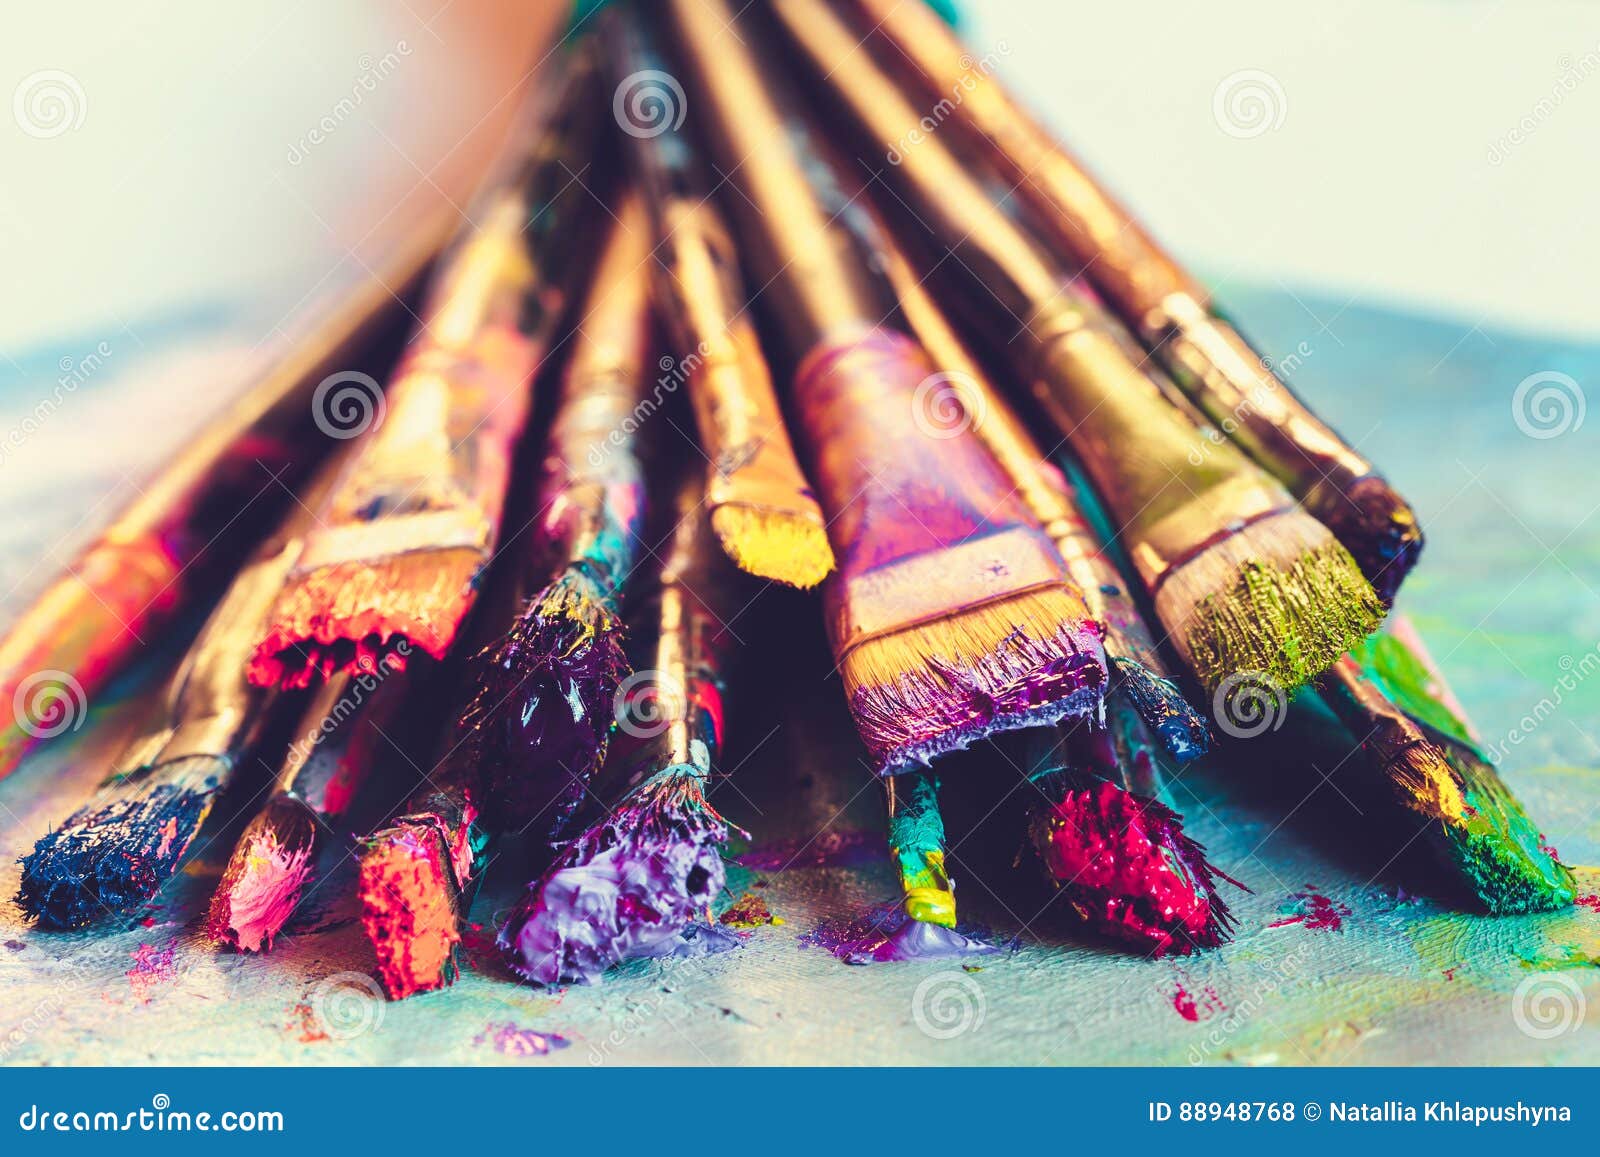 artist paintbrushes with paint closeup on artistic canvas.